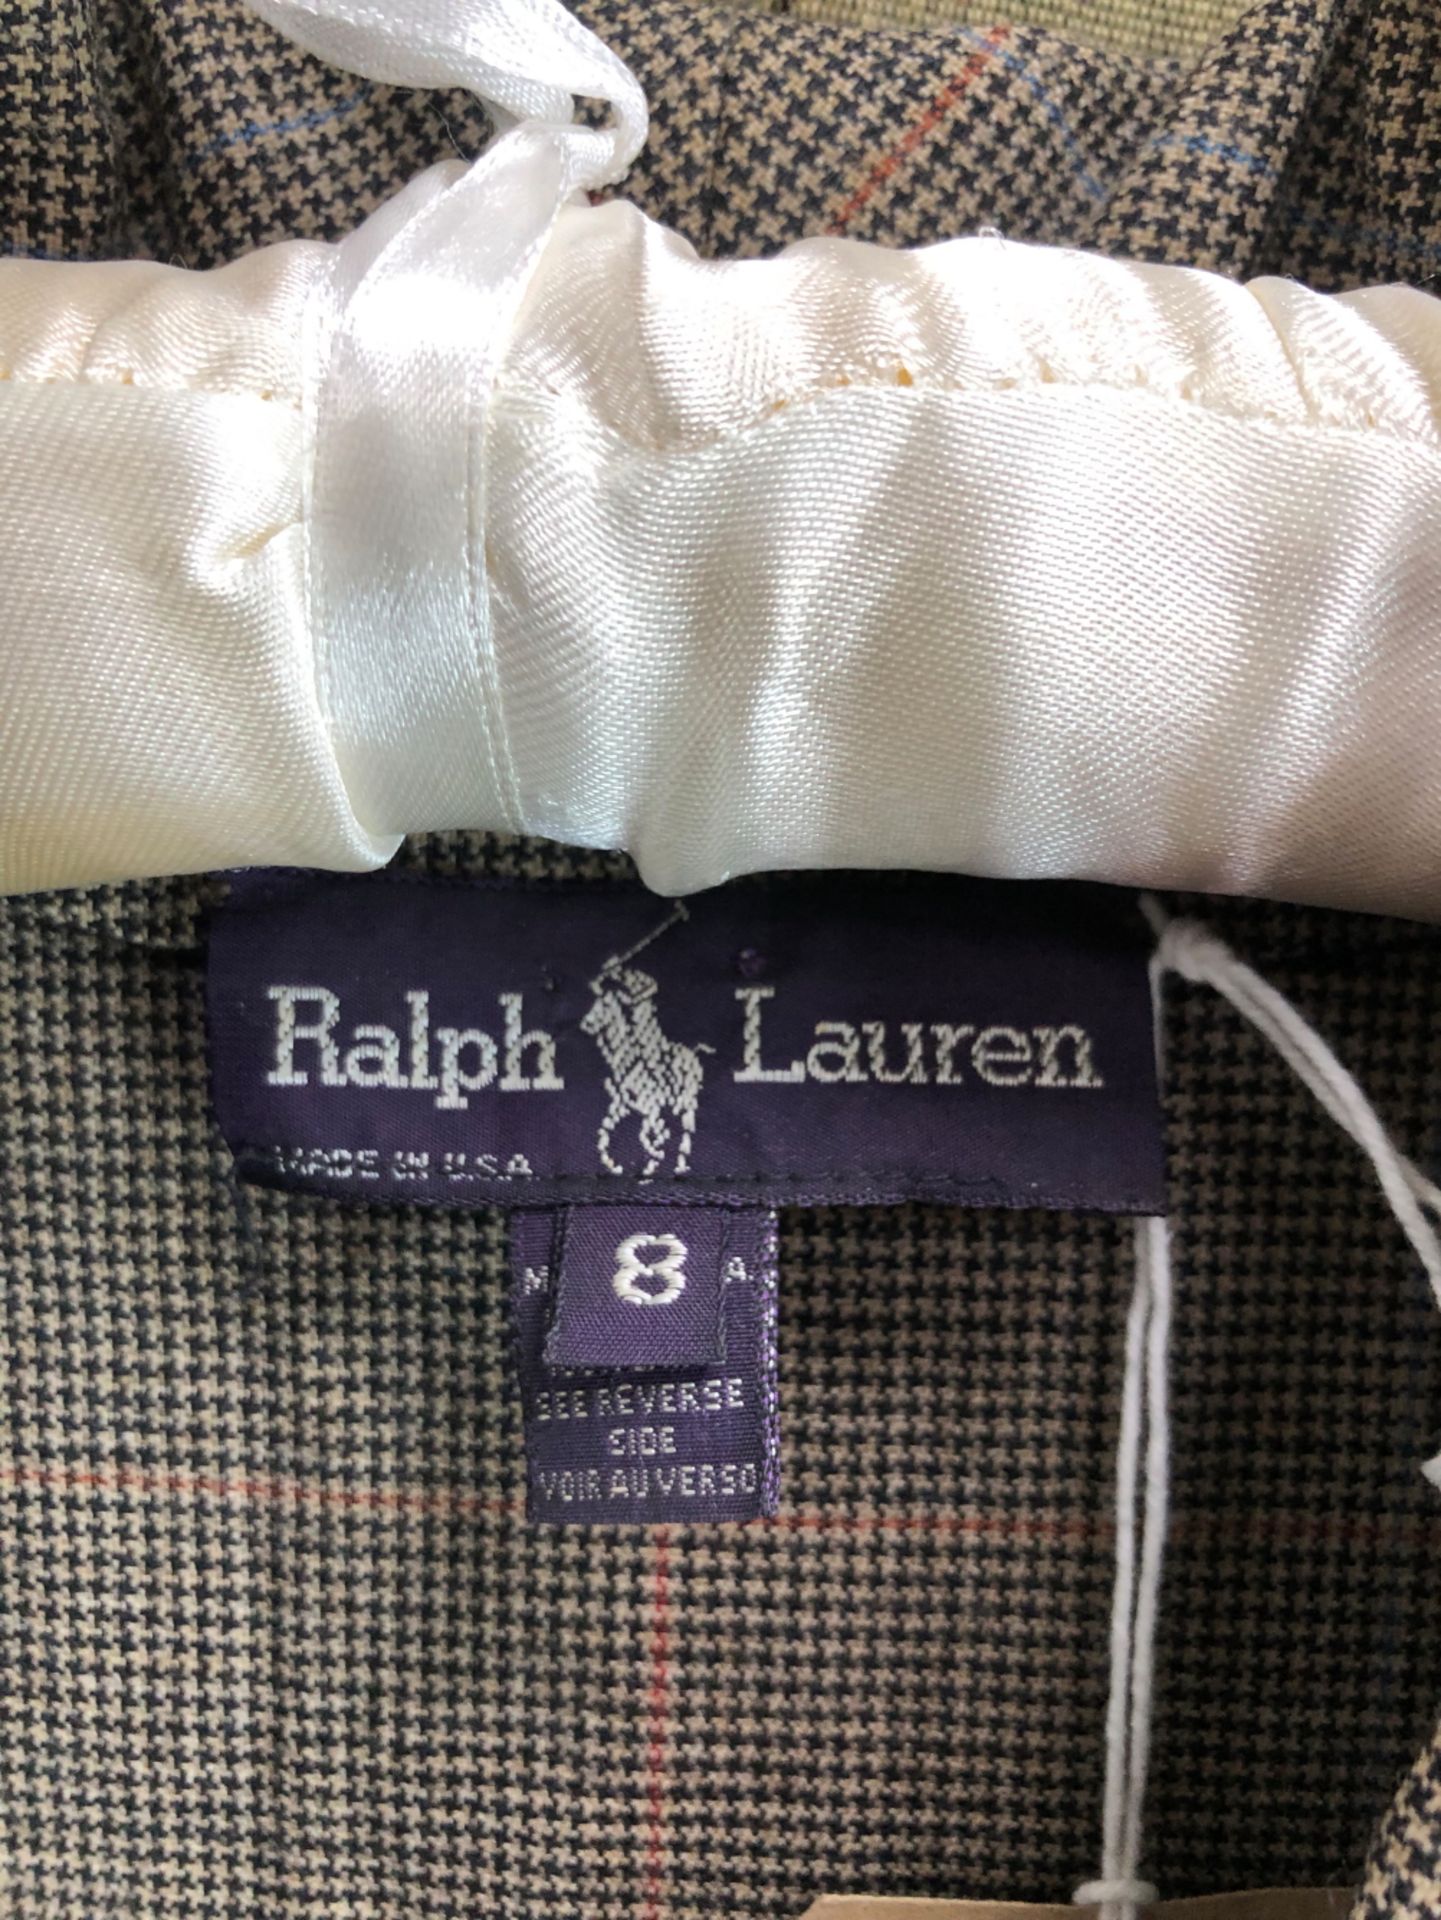 DRESS. EARLY 1980's RALPH LAUREN BELTED WOOL DRESS, US SIZE 8 - Image 2 of 8